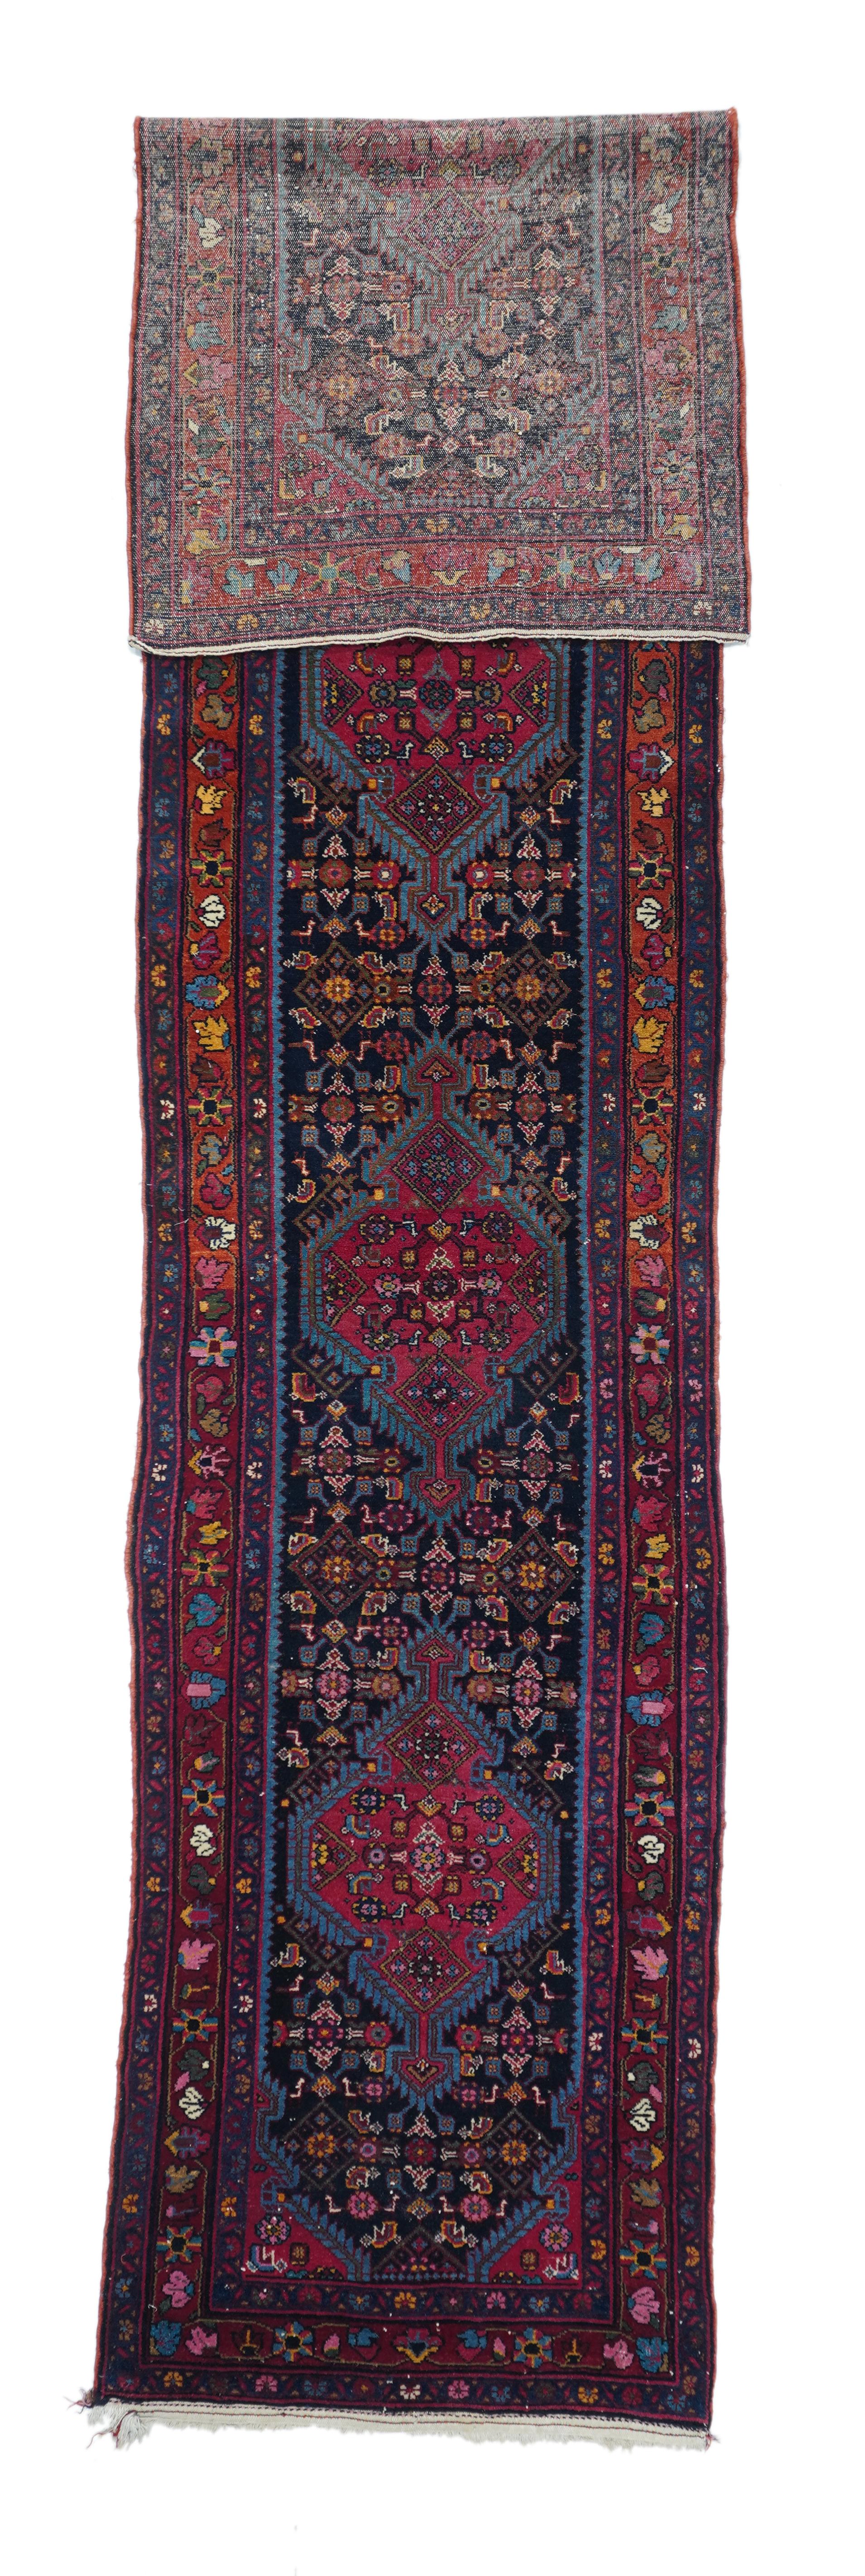 Antique Malayer runner measures 3'1'' x 14'8''.